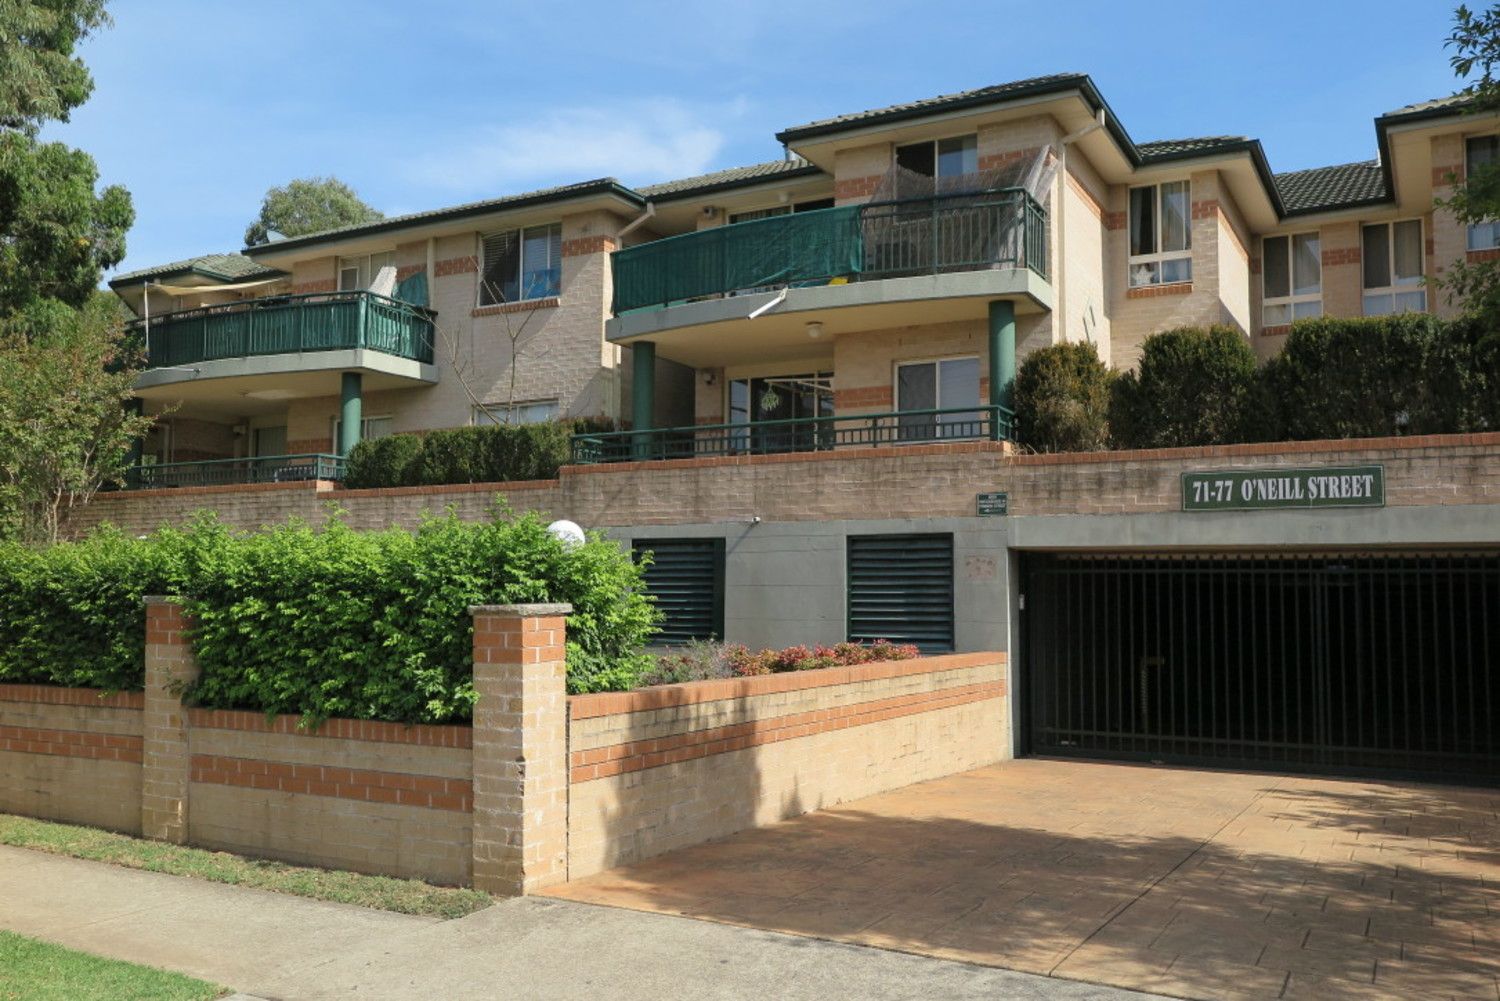 8/71-77 O'Neill Street, Guildford NSW 2161, Image 0